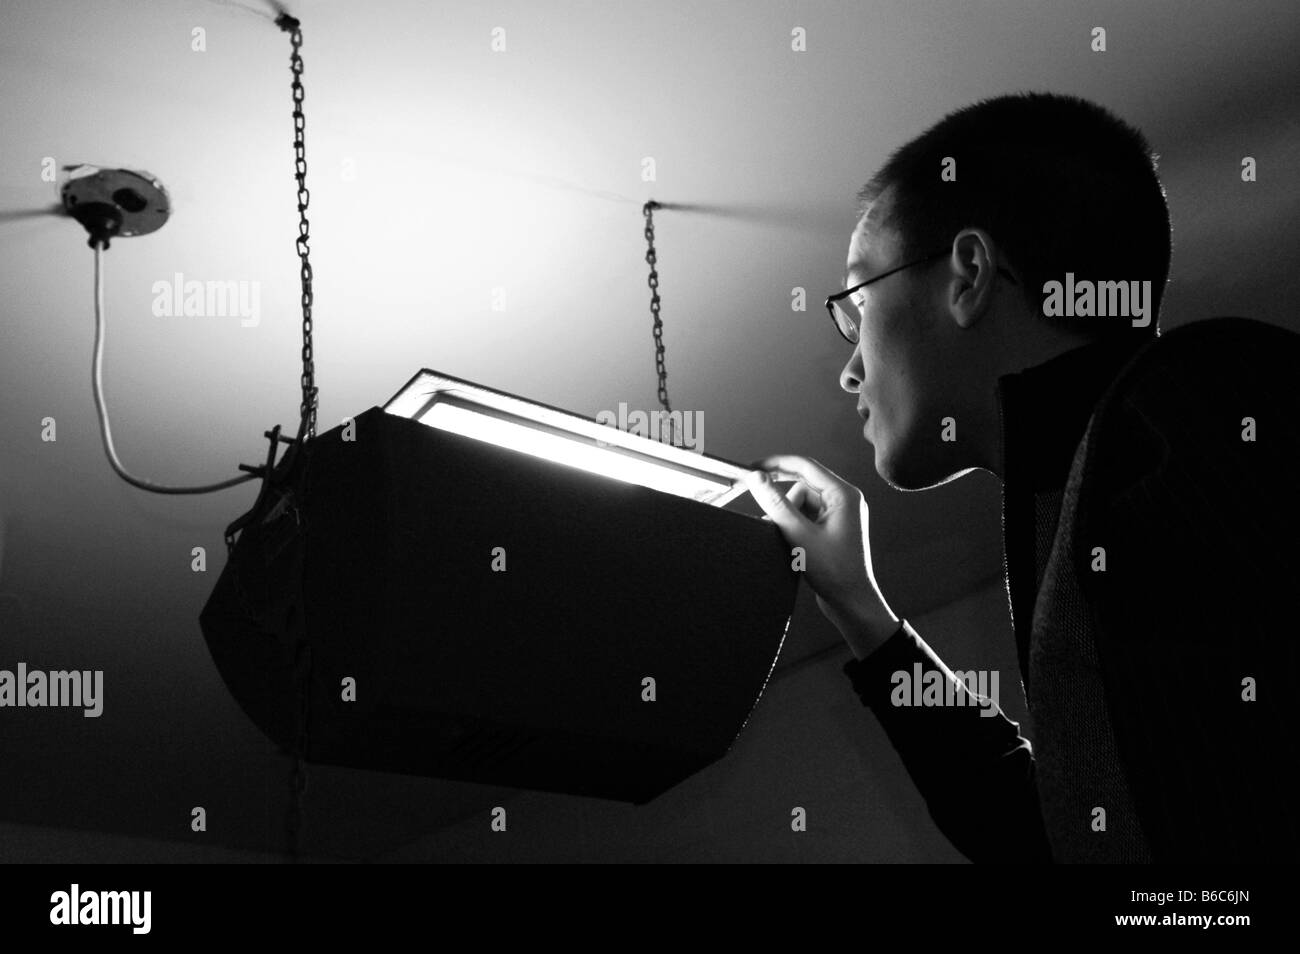 A curious person looks into a glowing box. Stock Photo